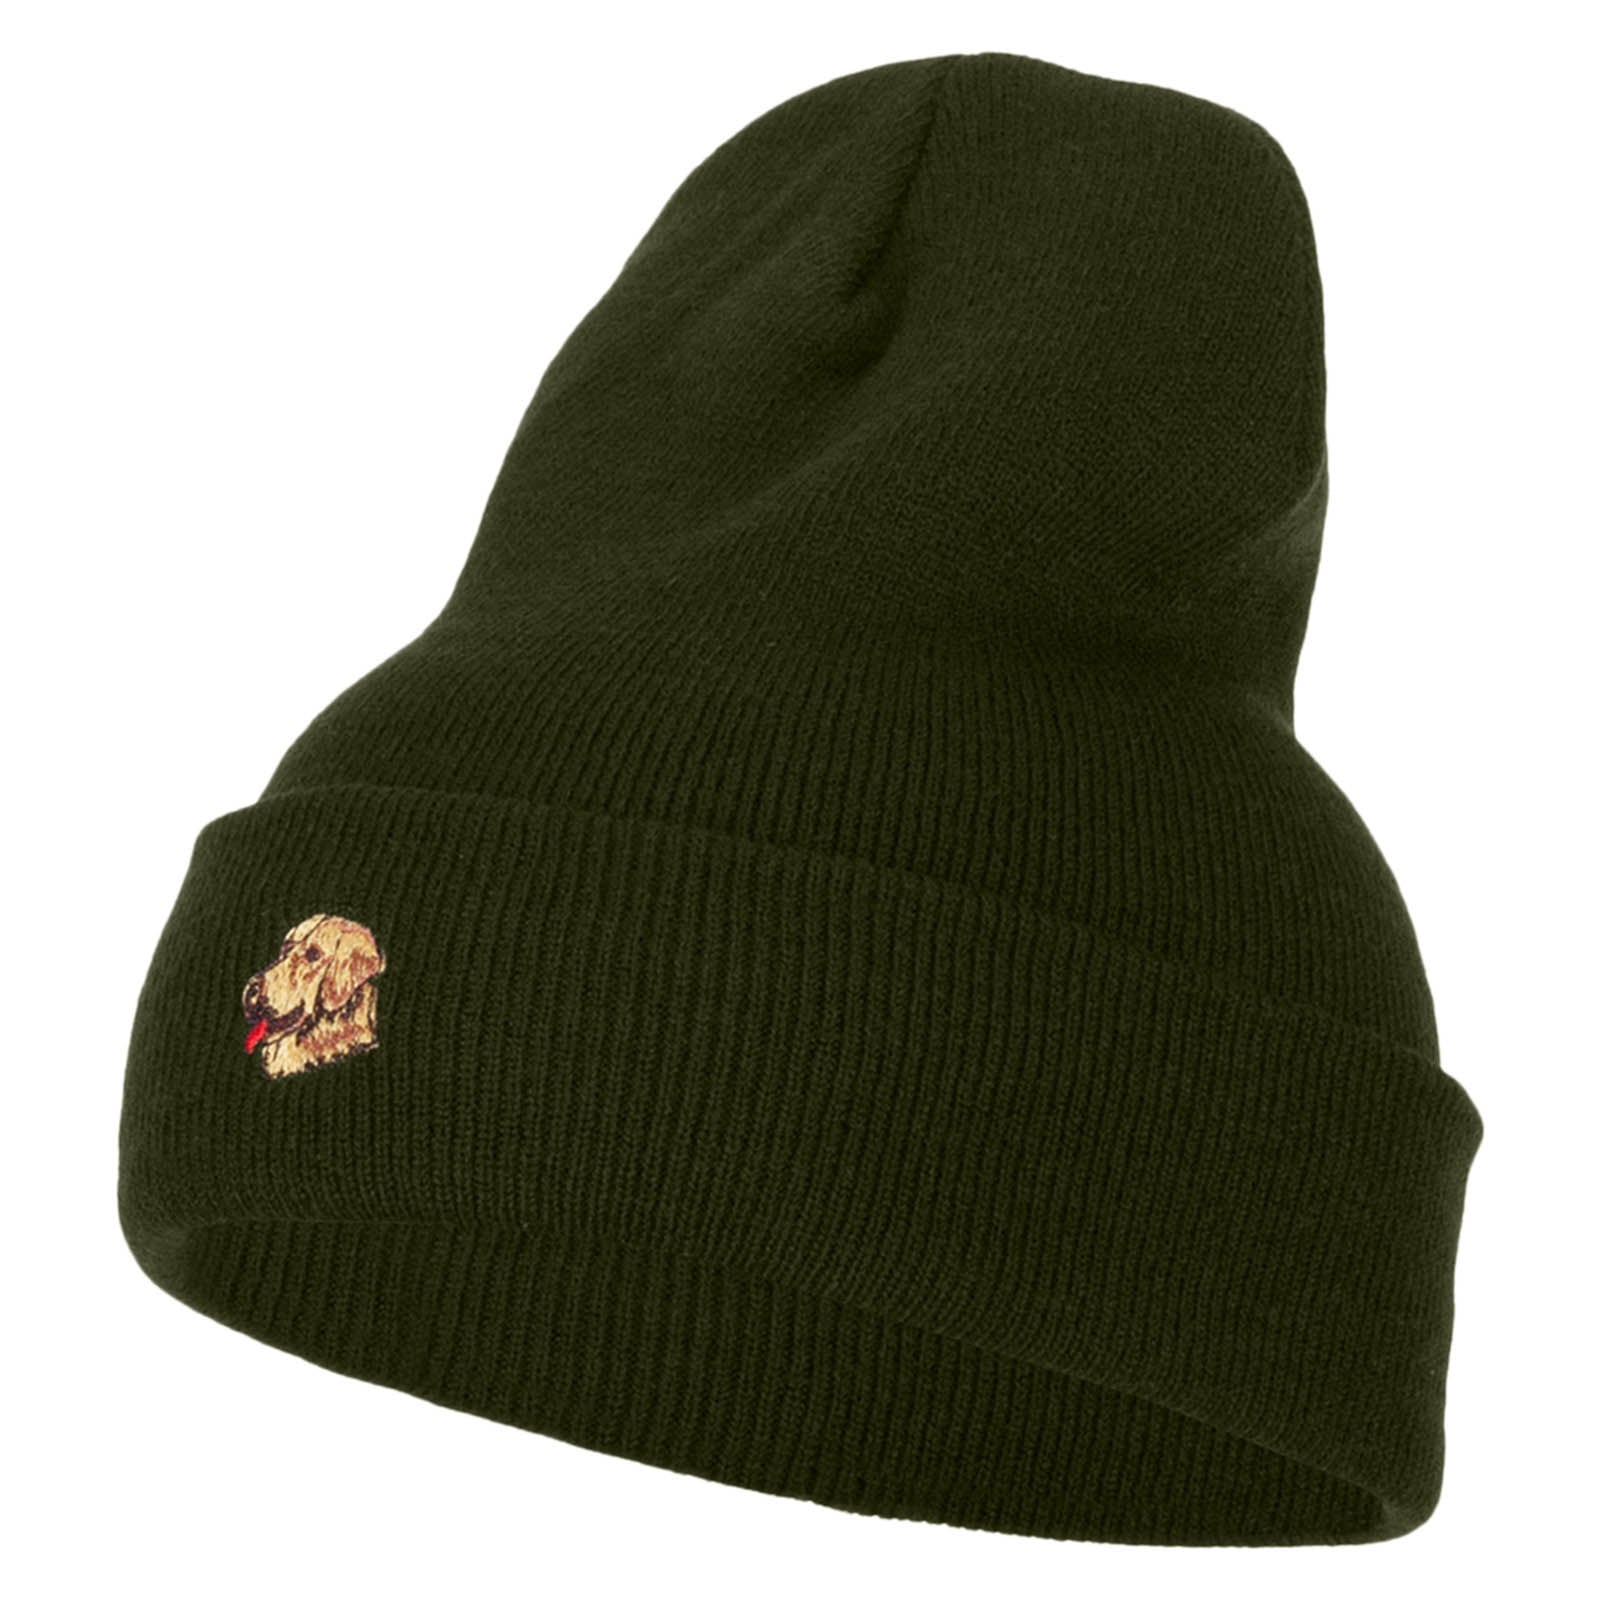 Golden Retriever Head Embroidered Long Knitted Beanie - Olive OSFM